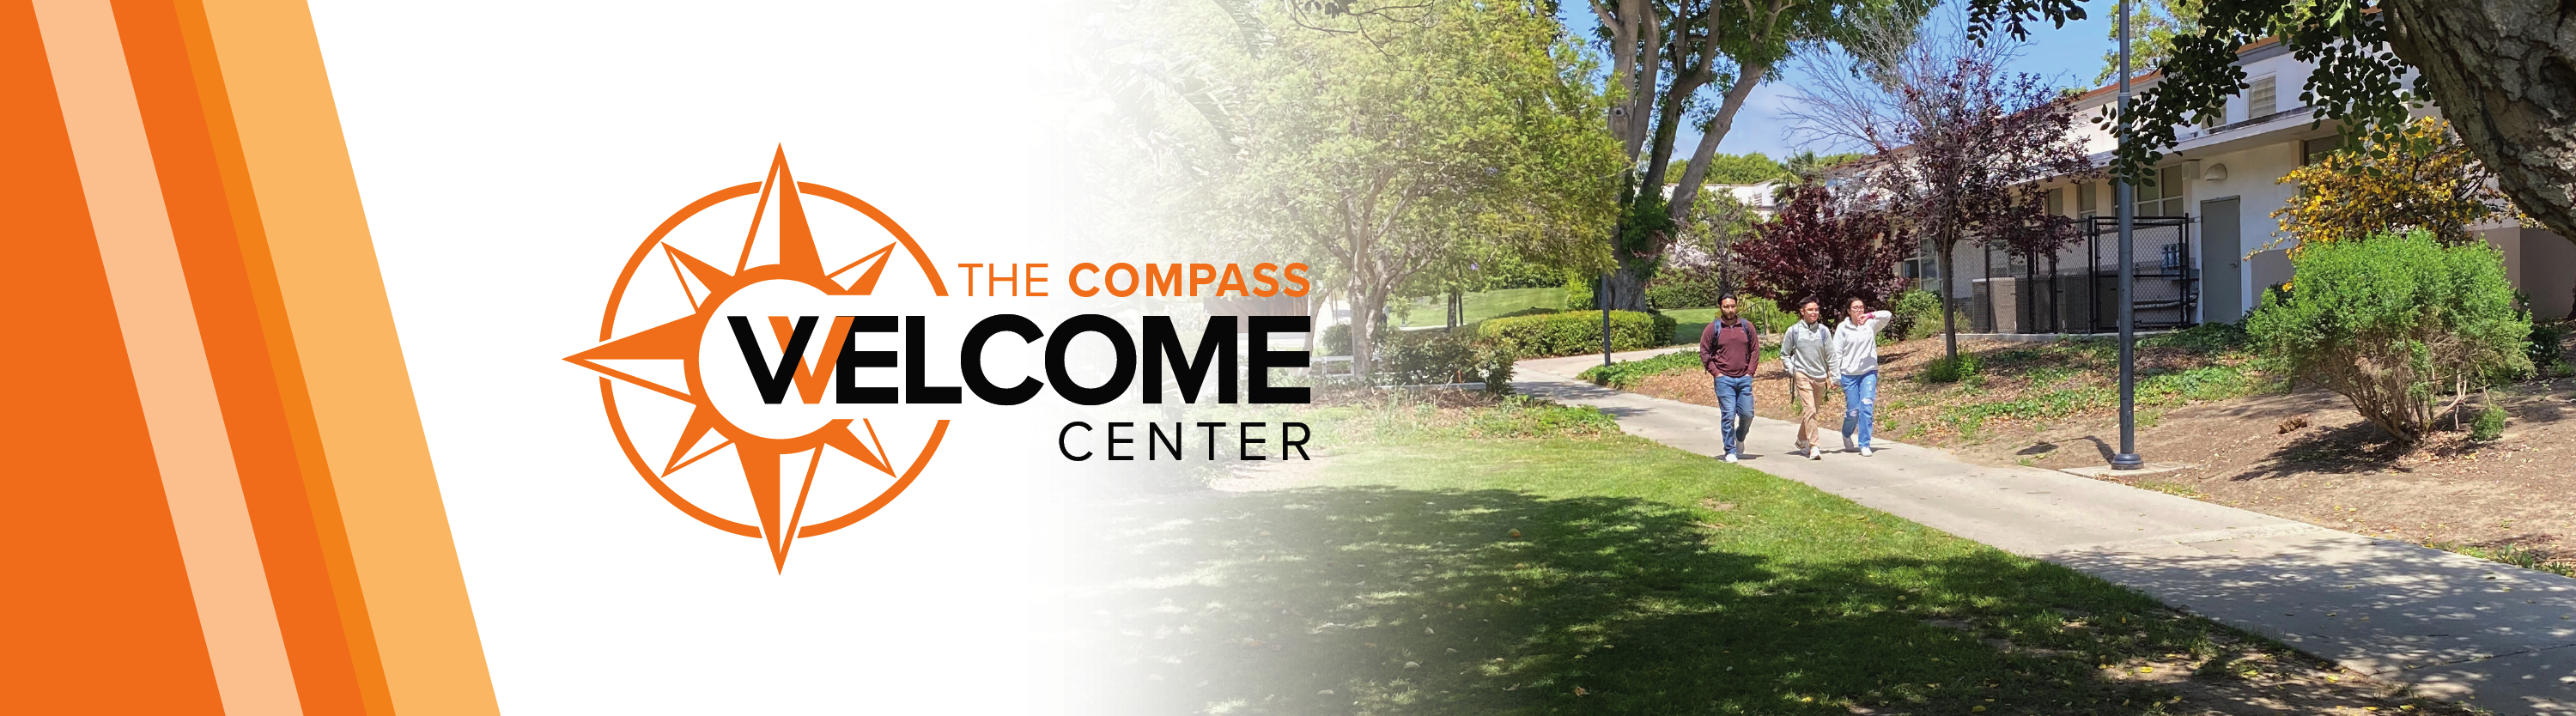 students walking on campus with welcome center logo